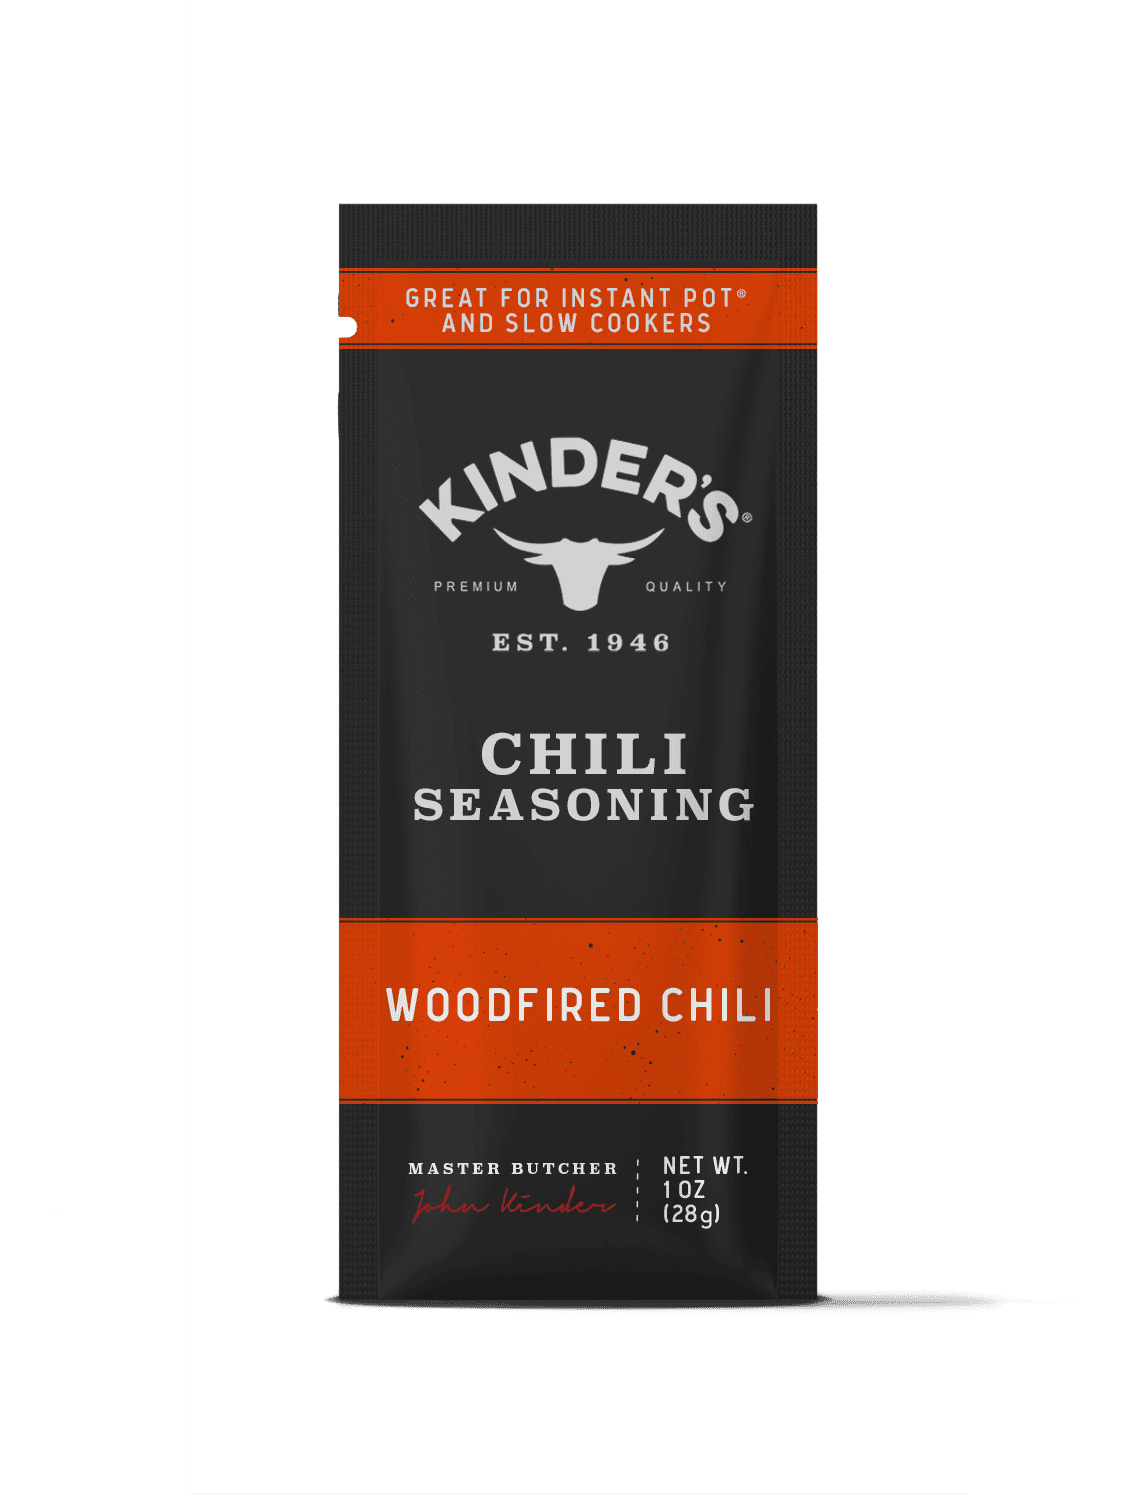 Kinder's Woodfired Chili Seasoning, Smoky Flavors with Chilis and Herbs, No Added MSG, No Preservatives, and No Artificial Flavors, 1.0oz